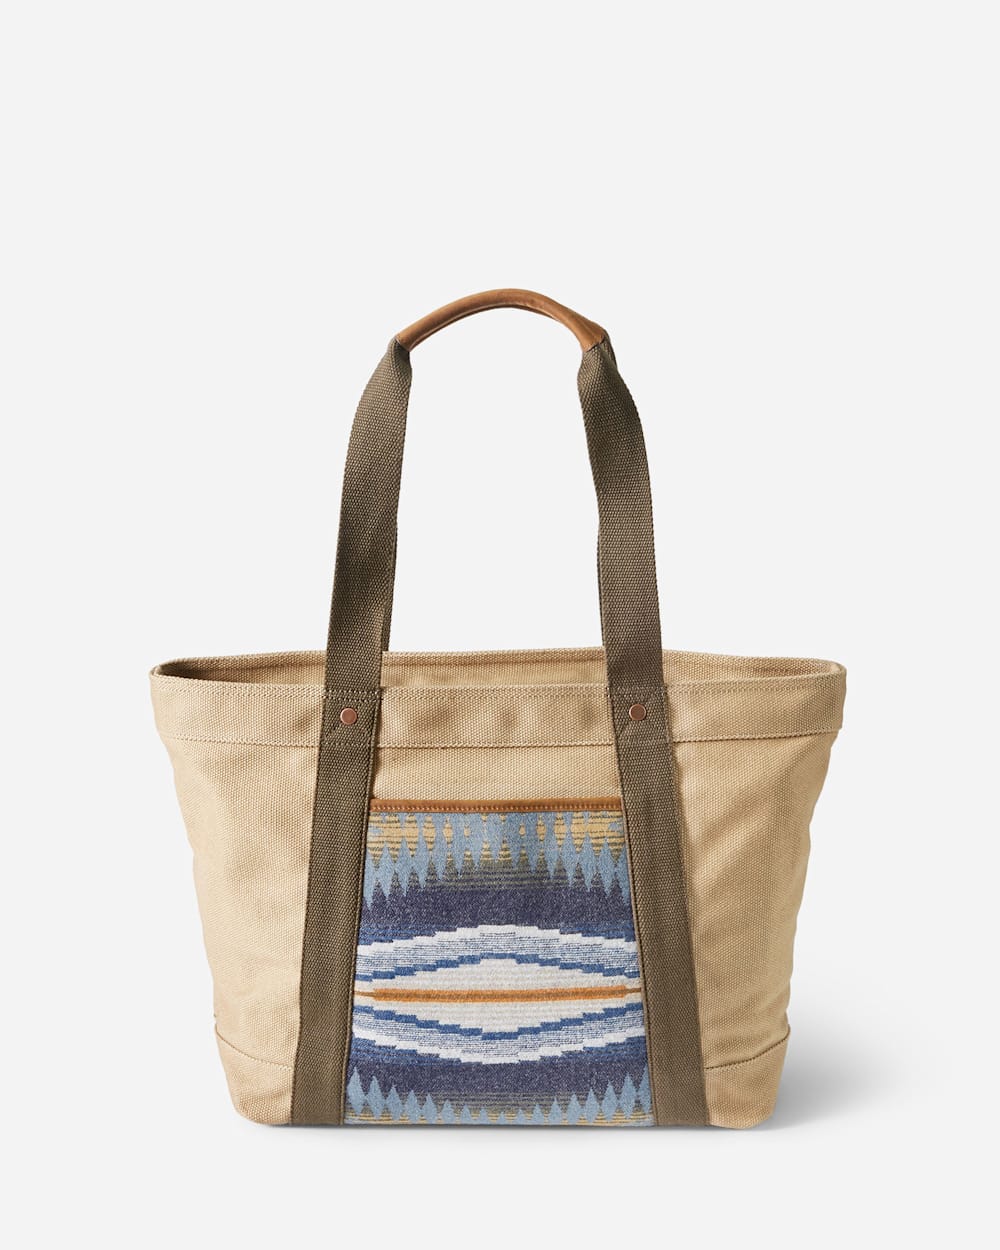 ALTERNATE VIEW OF CRESCENT BAY TOTE IN INDIGO image number 2